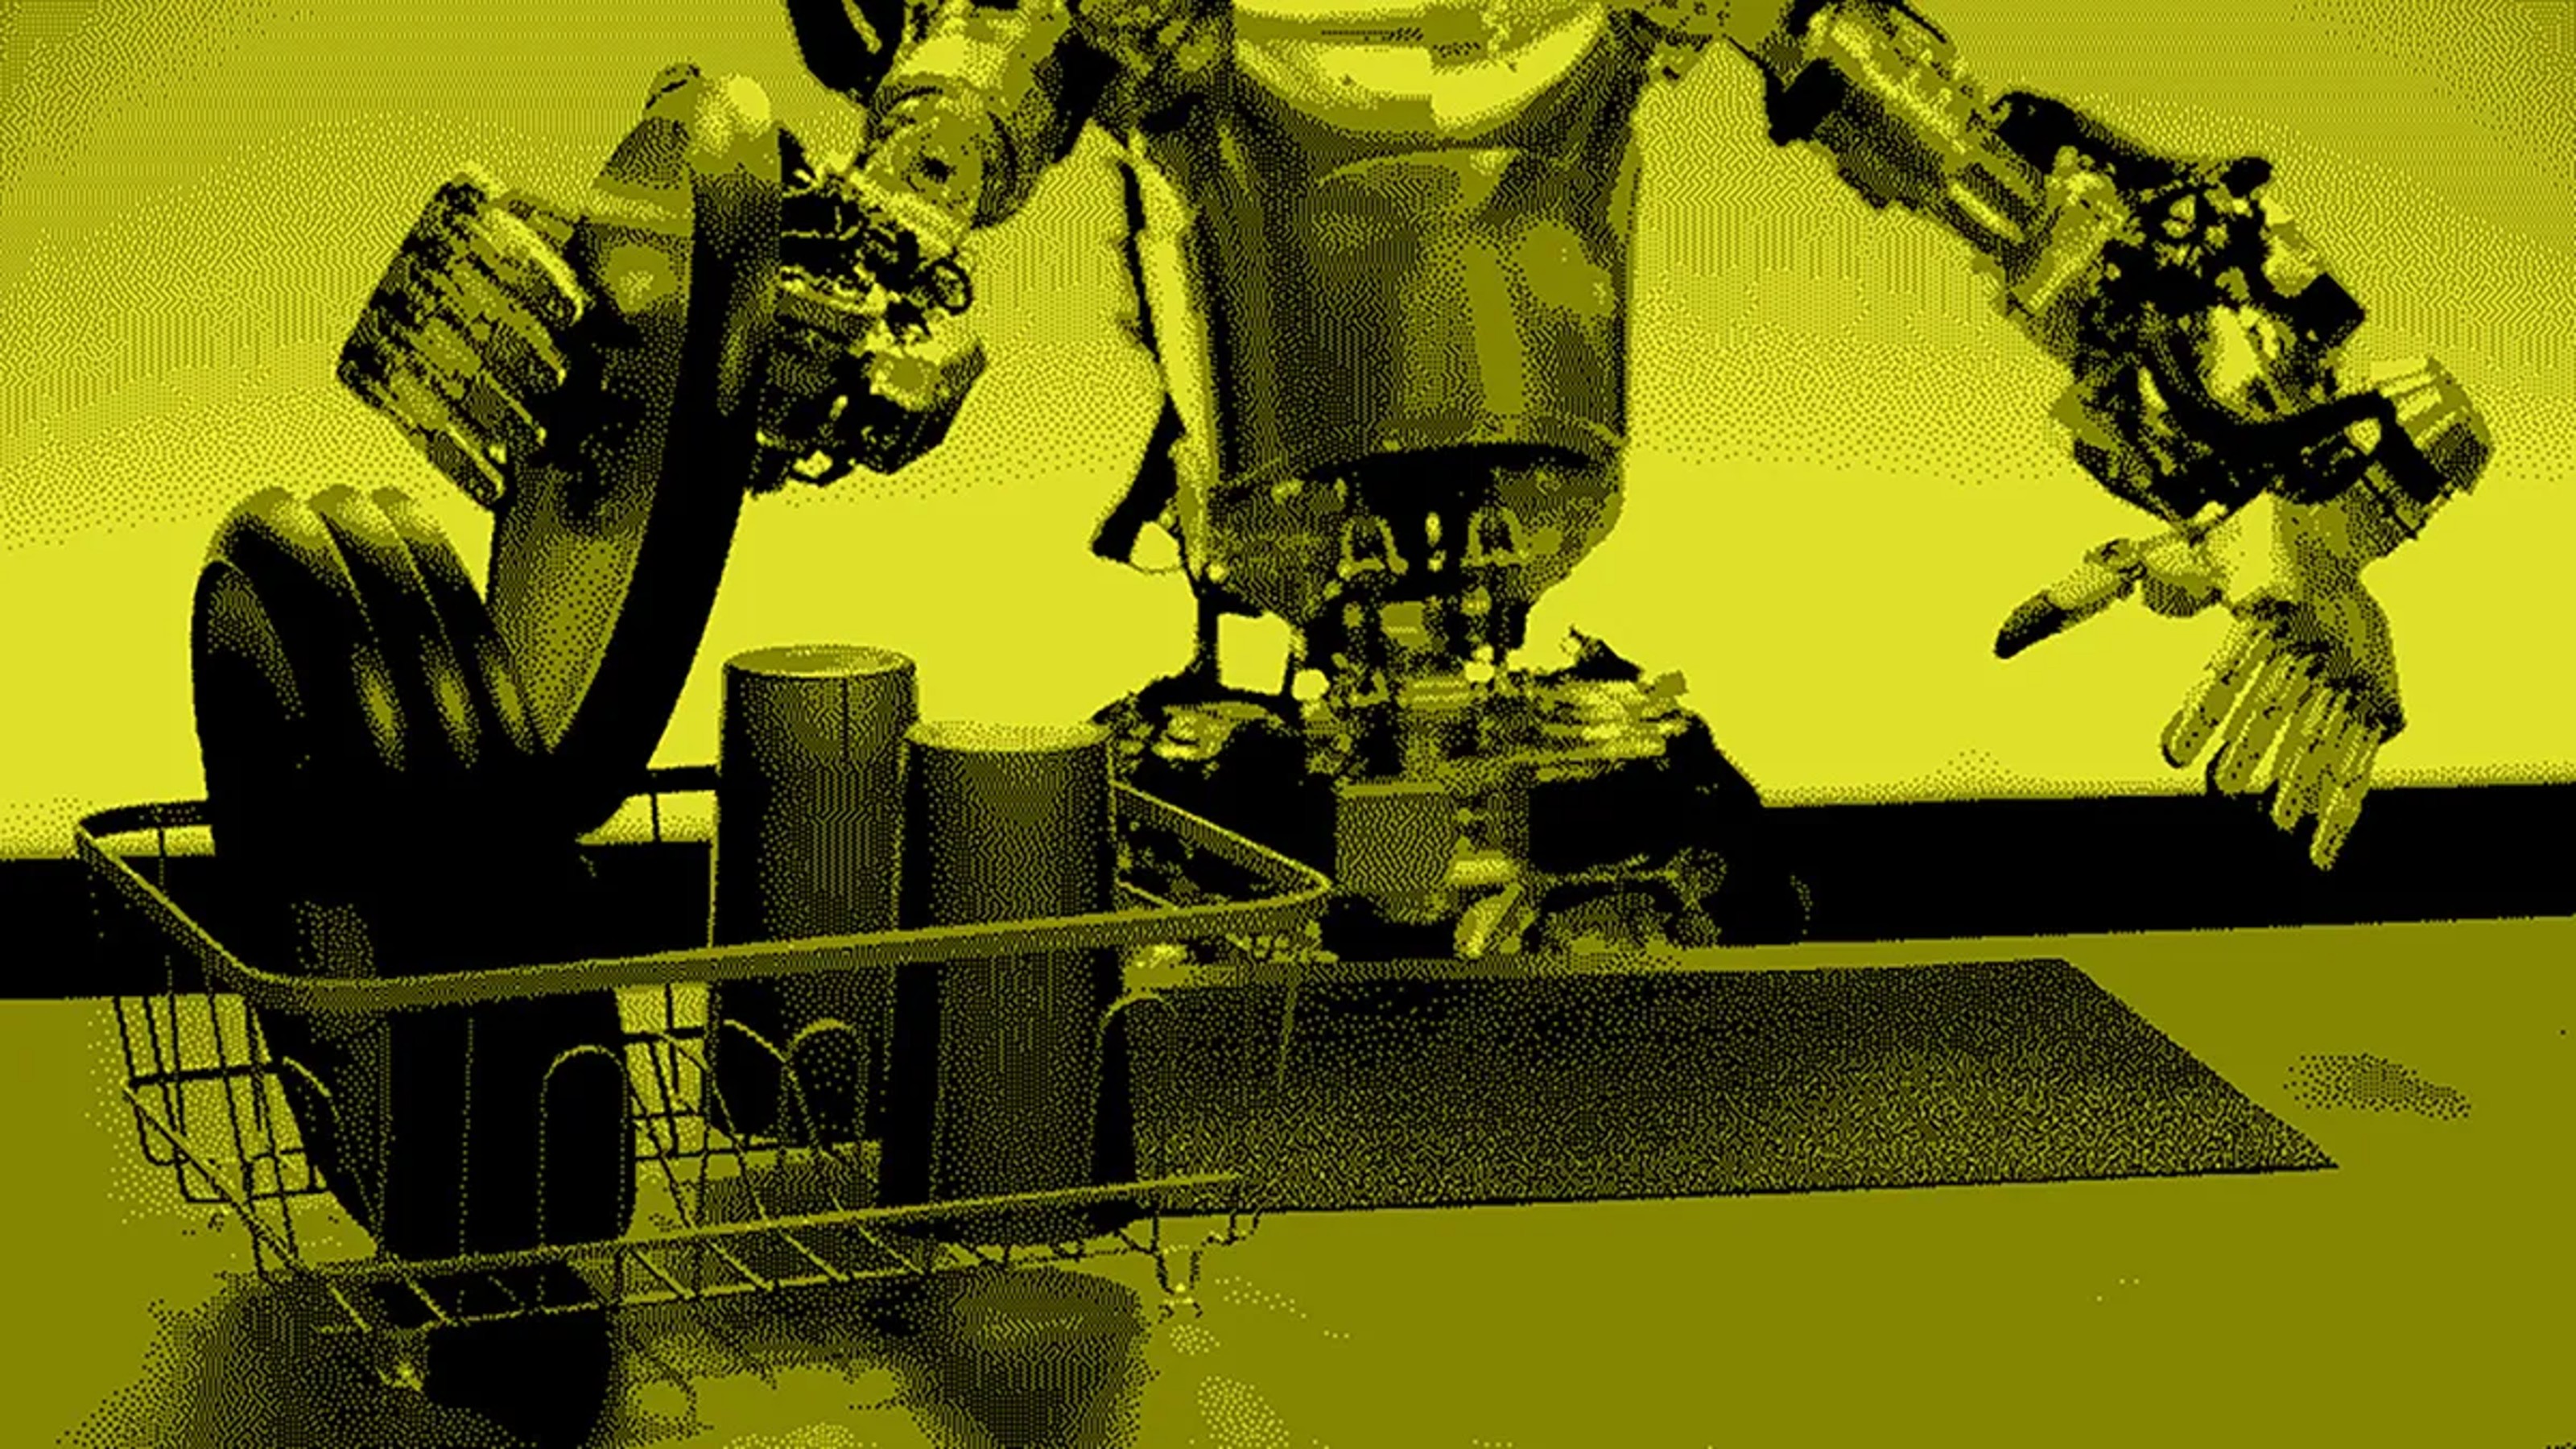 Two robotic arms sorting cans into a wire basket on a yellow background.